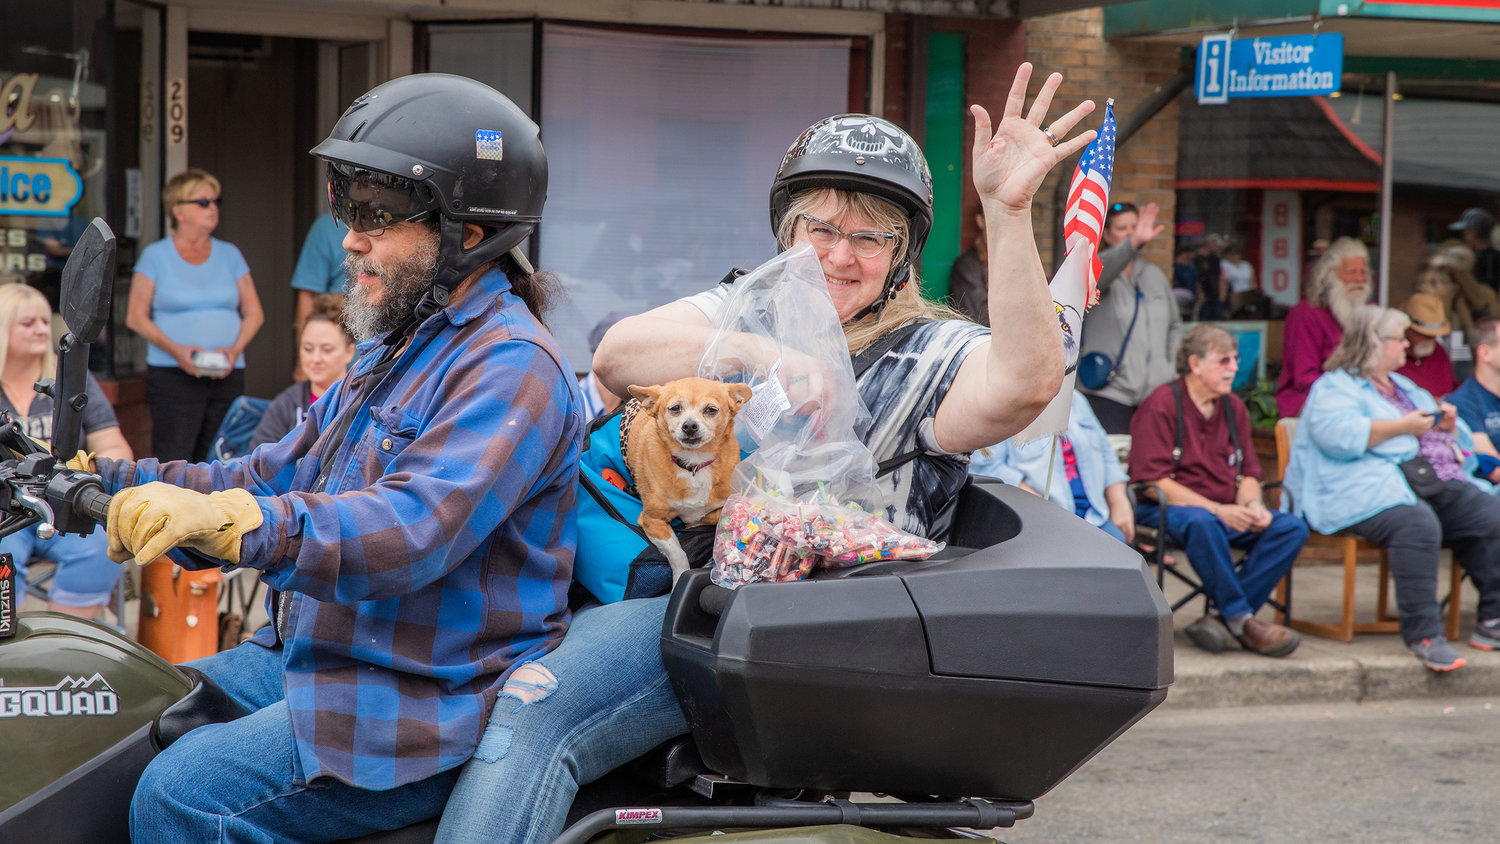 Riders smile and wave while passing out candy with their puppy Saturday during a parade in downtown Morton.